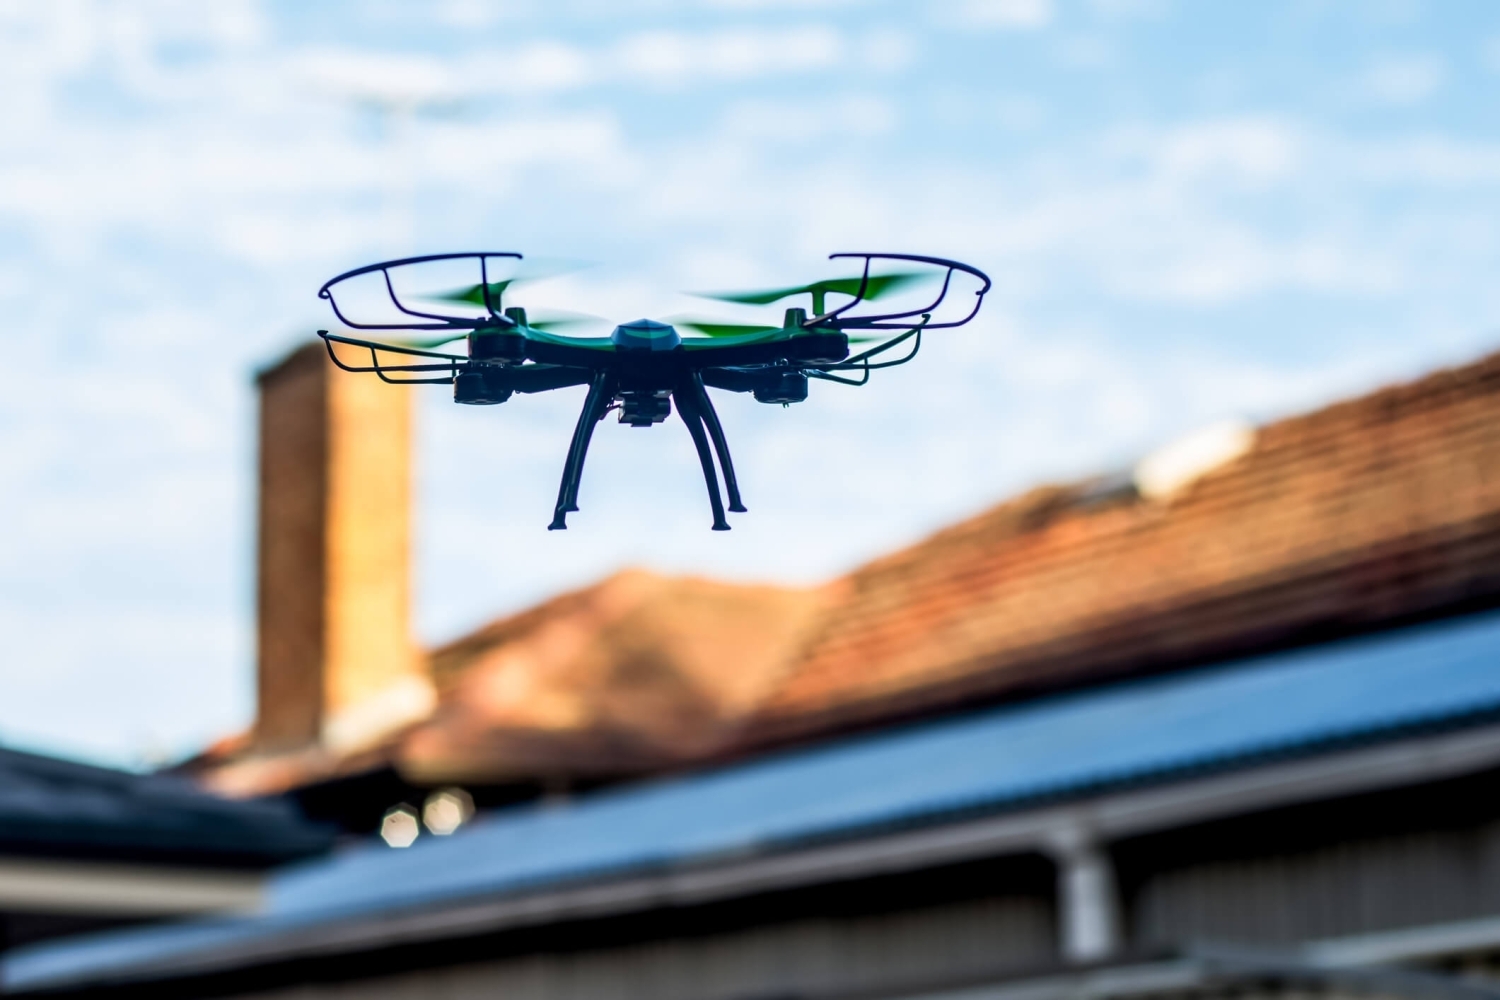 A roofing drone flying over a house with a shingle roof and a chimney in front of a blue sky.